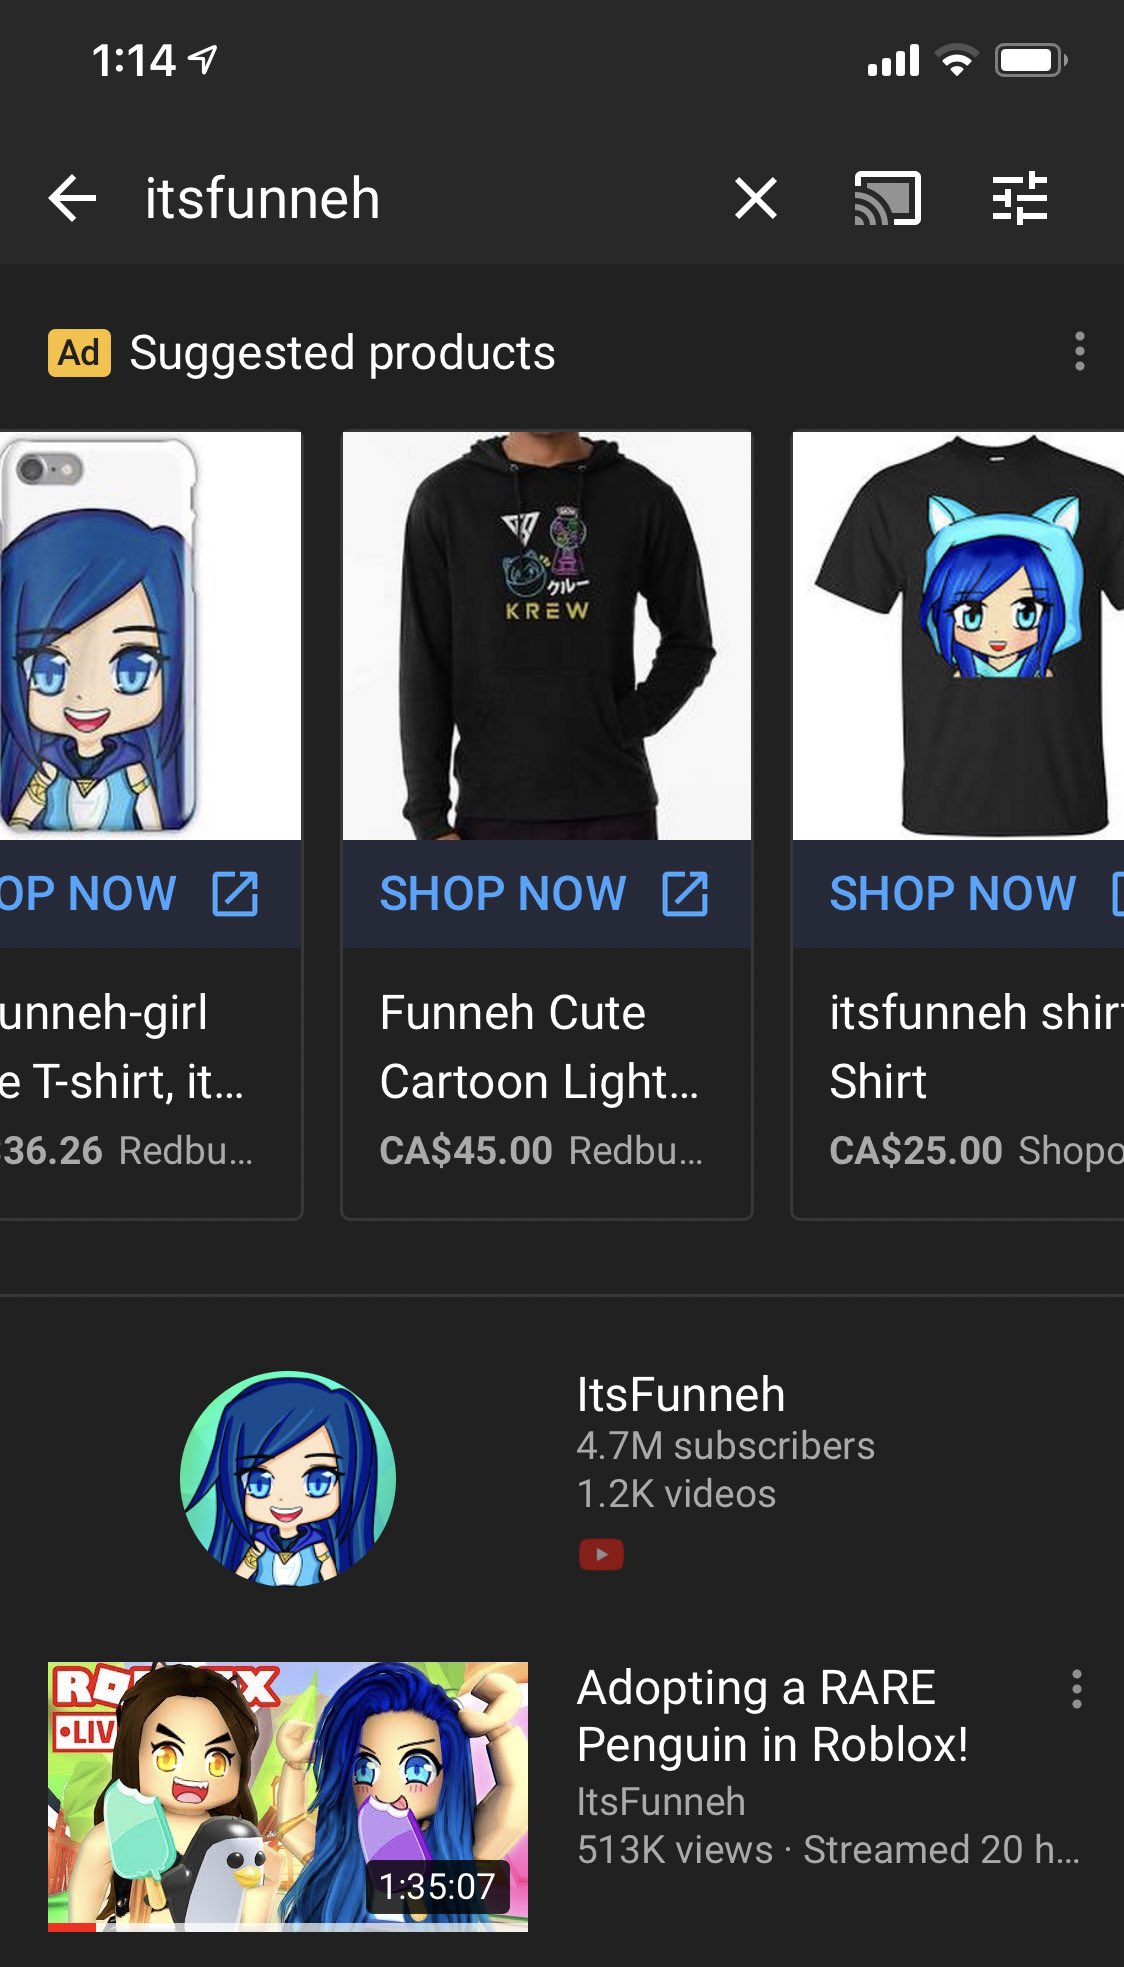 Funneh Krewmate On Twitter Smh Fake Merch Is Being Specifically Advertised On My Youtube Channel And Videos This Merch Is All Stolen Art Don T Ever Buy Or Support These Thieves Why Do - itsfunneh roblox new videos 2019